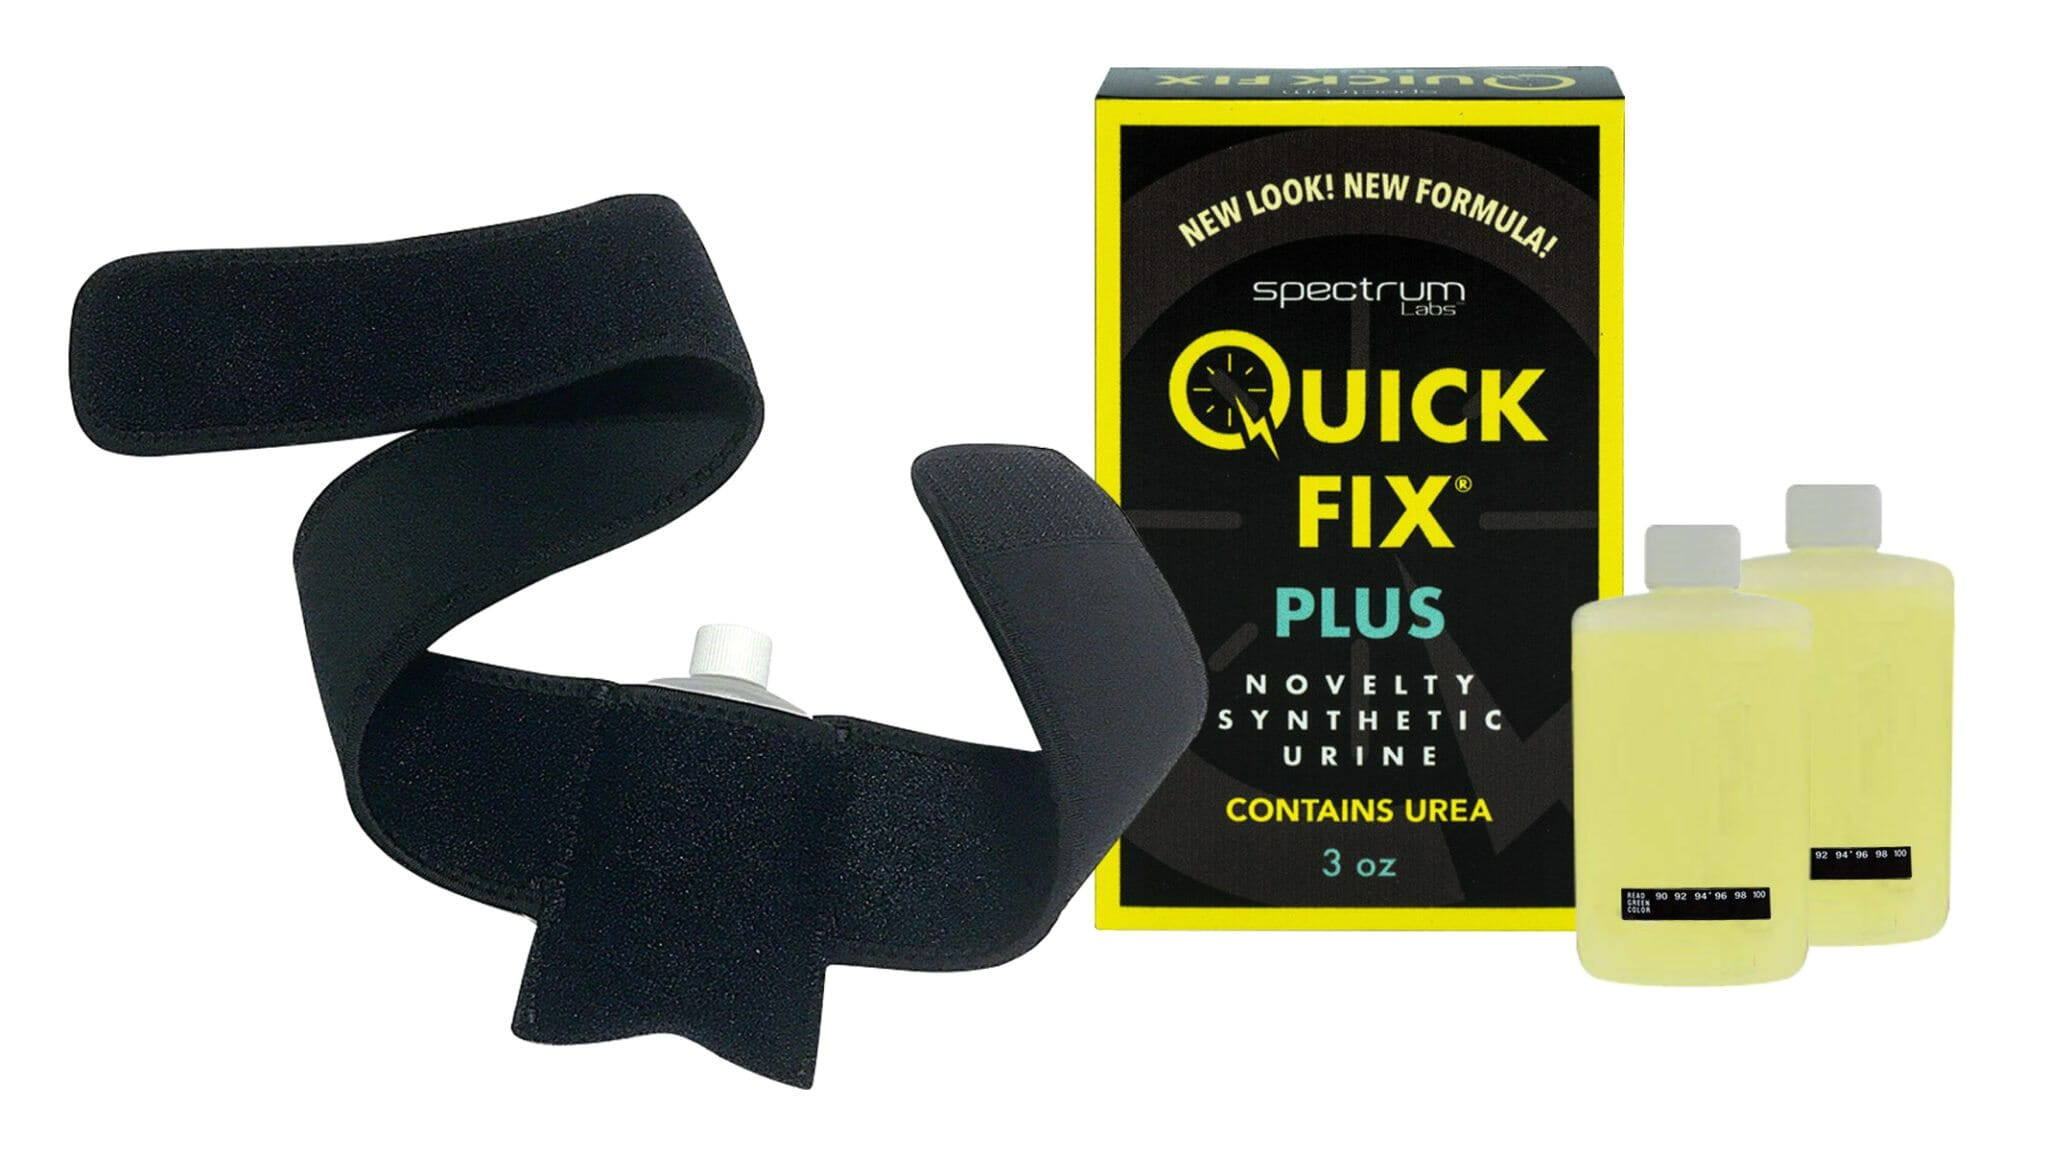 Spectrum Labs Quick Fix Plus Novelty Synthetic Urine Quick Fix 6 2 Review January 2019 Does It Really Work